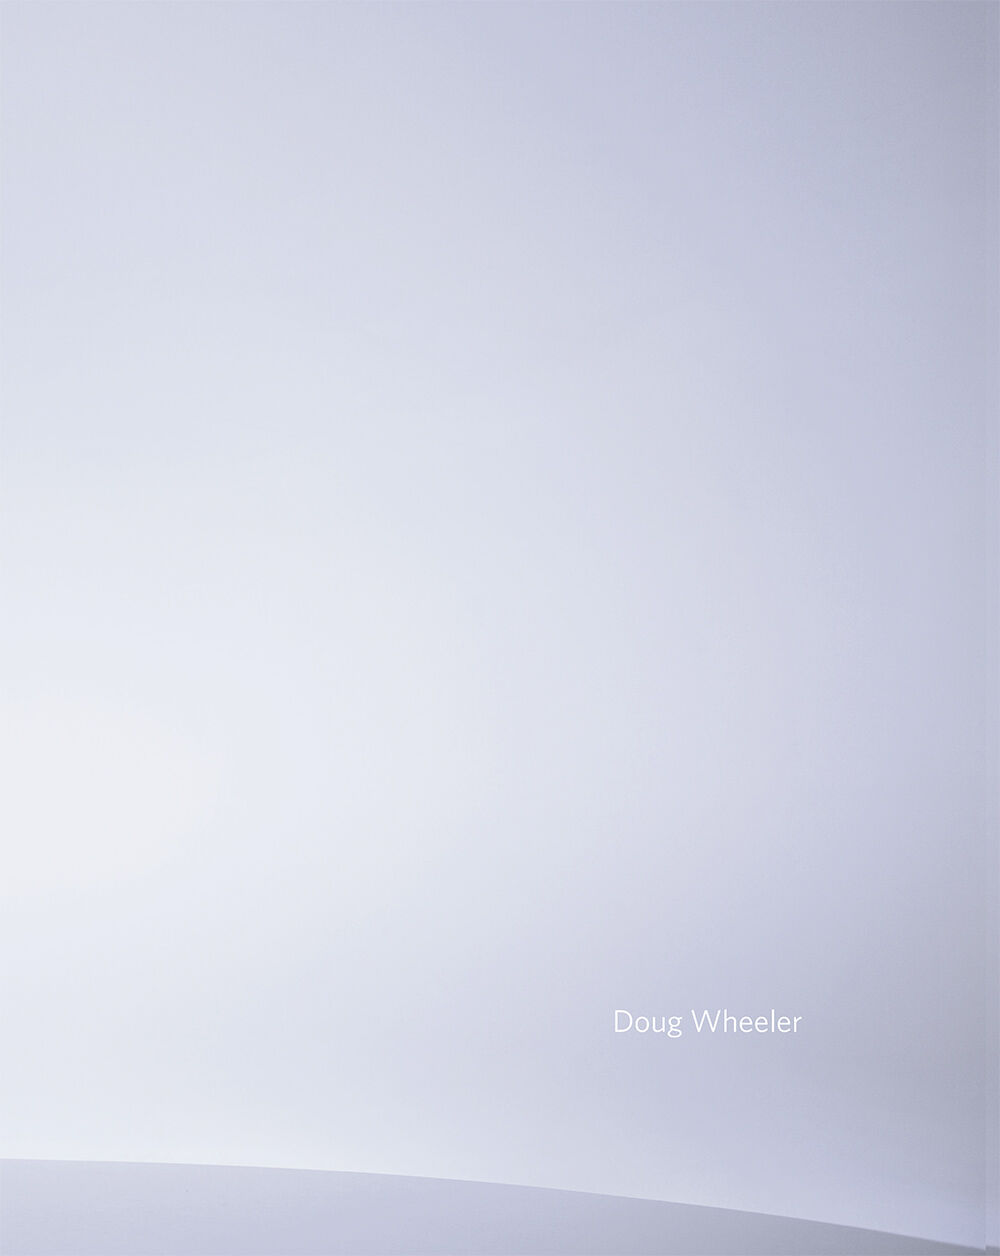 Cover of a book titled Doug Wheeler, published by David Zwirner Books in 2019.